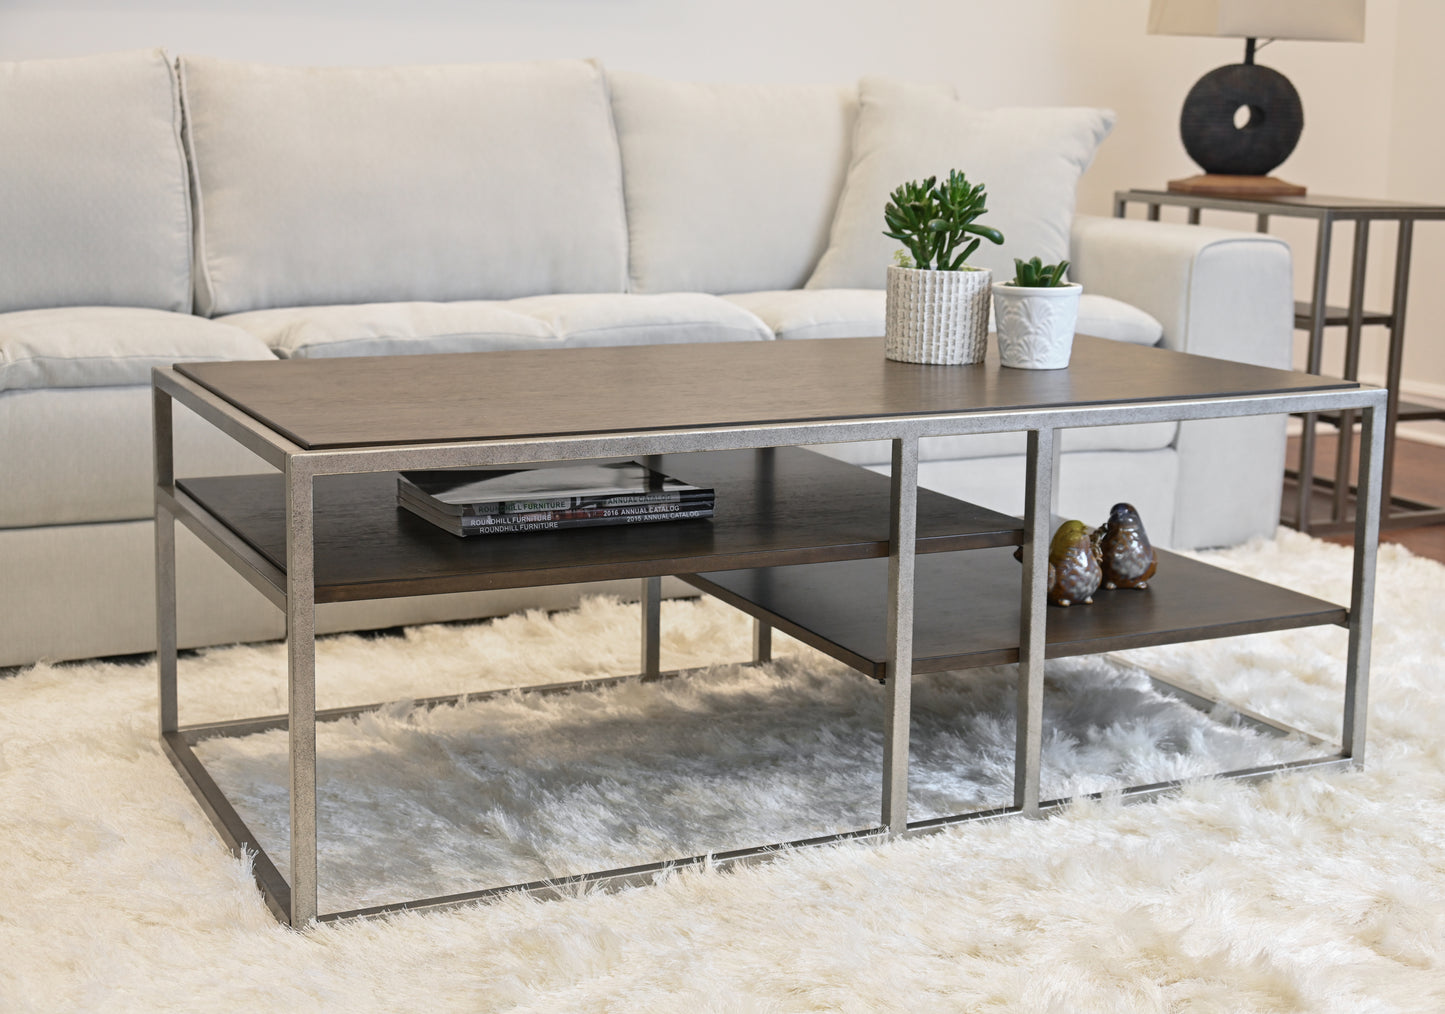 Roundhill Furniture Padena 3-Piece Metal Frame Wood Living Room Coffee Table and 2 Chairside Tables Set